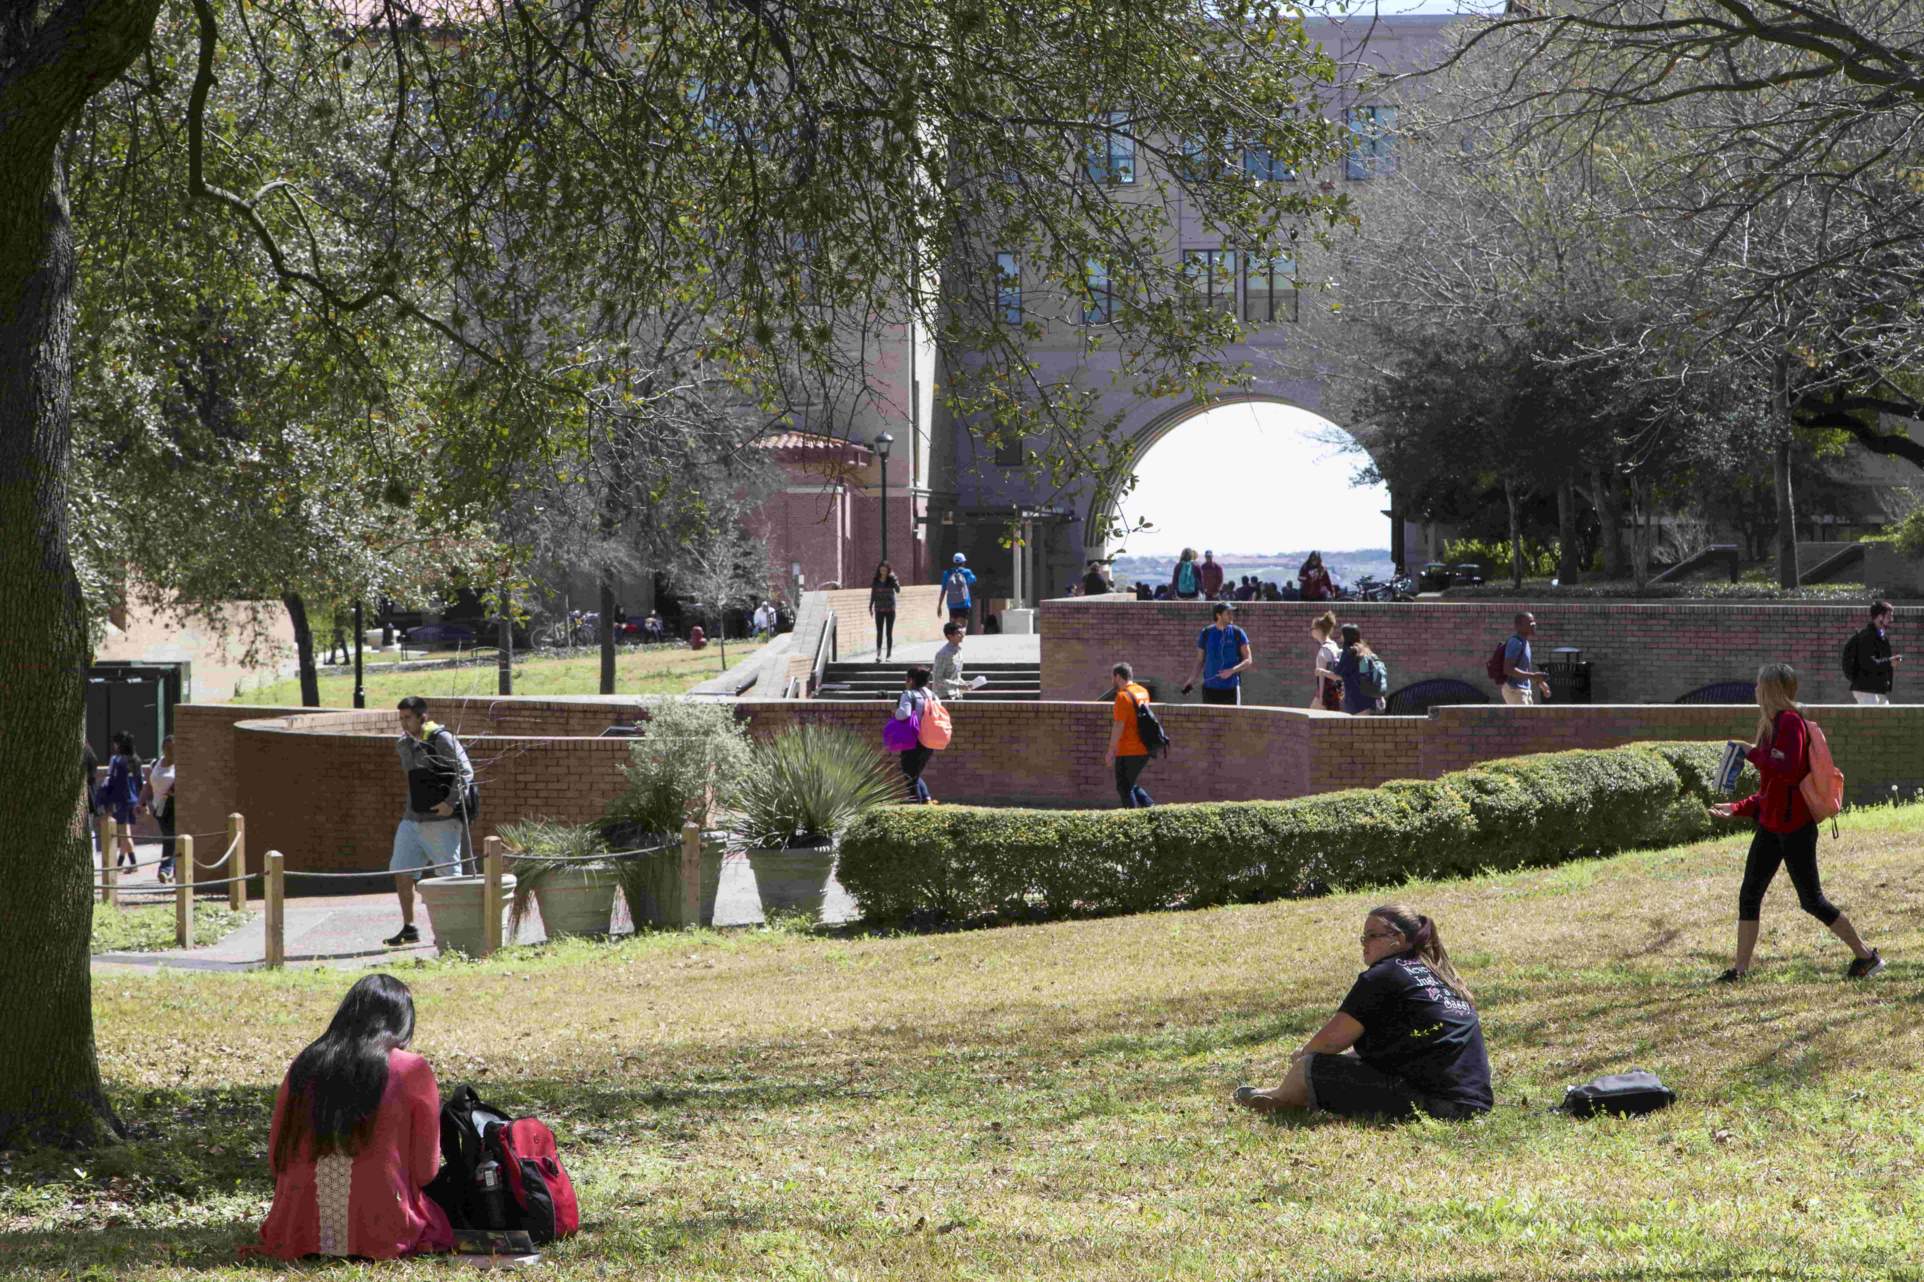 students sitting on campus